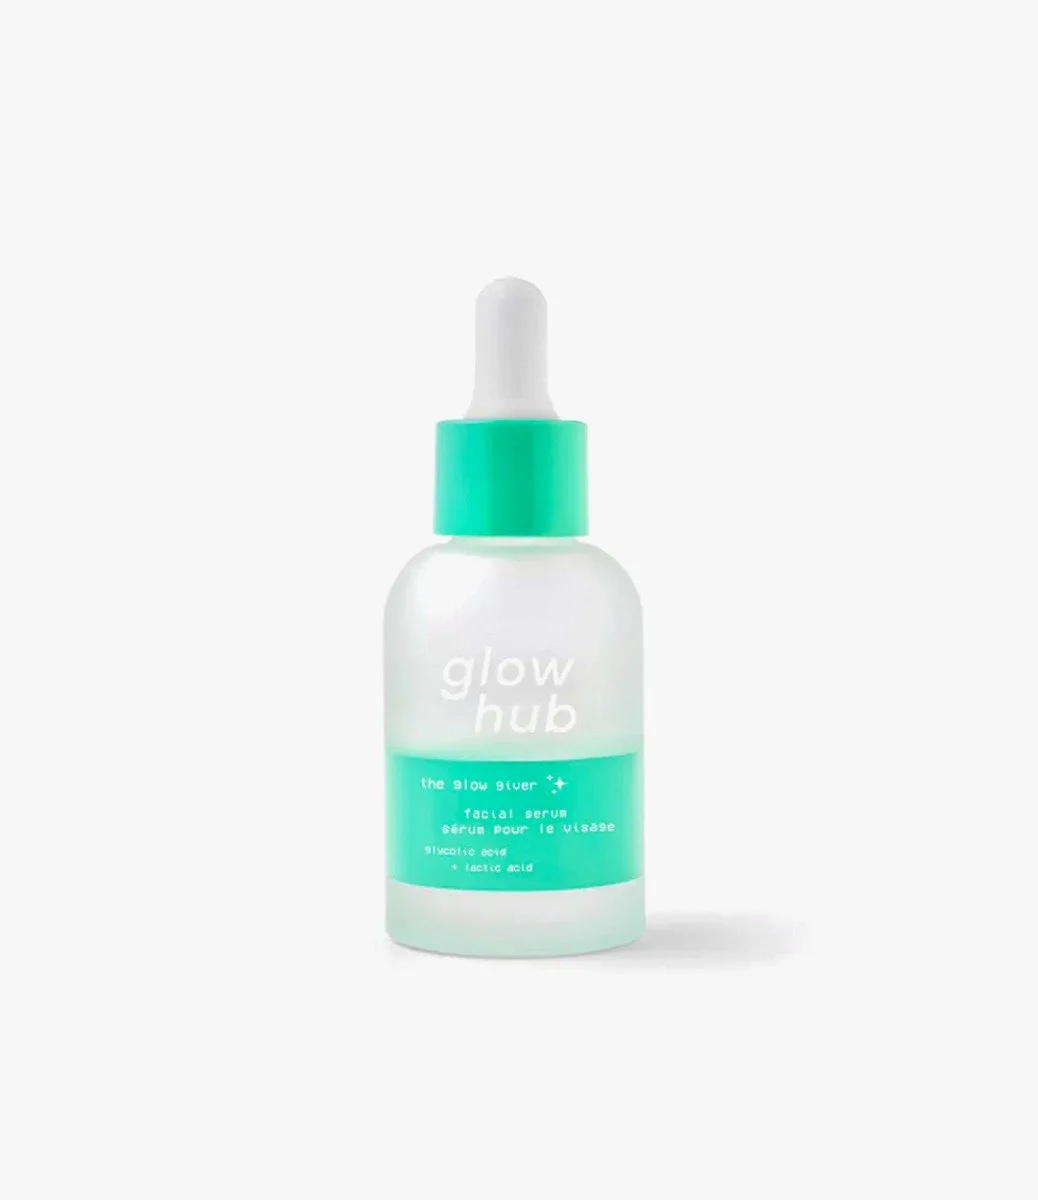 The Glow Giver Serum Glycolic + Lactic Acid by Glow Hub